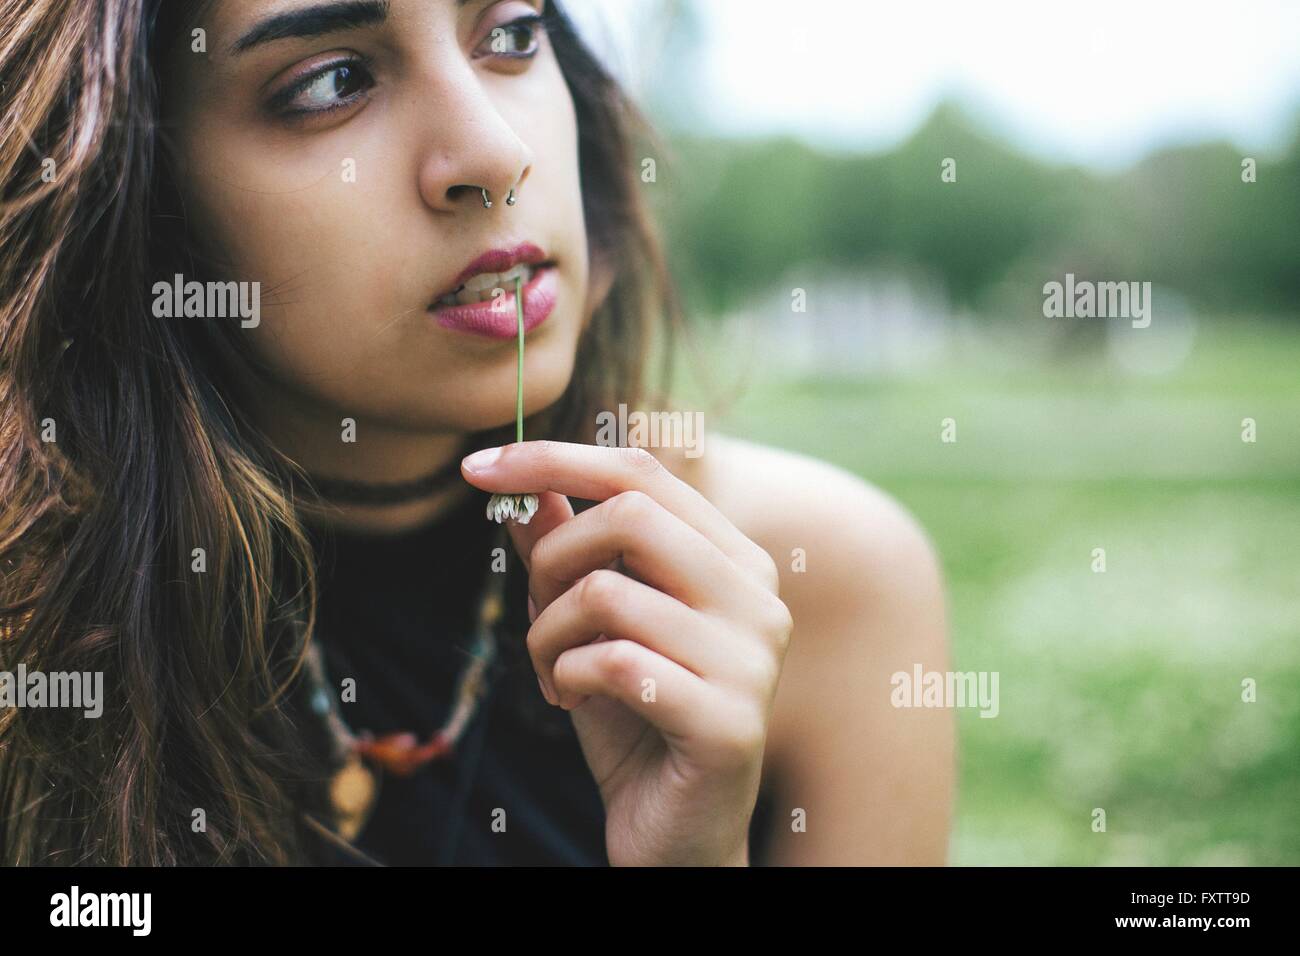 Woman with nose ring chewing grass looking away Stock Photo